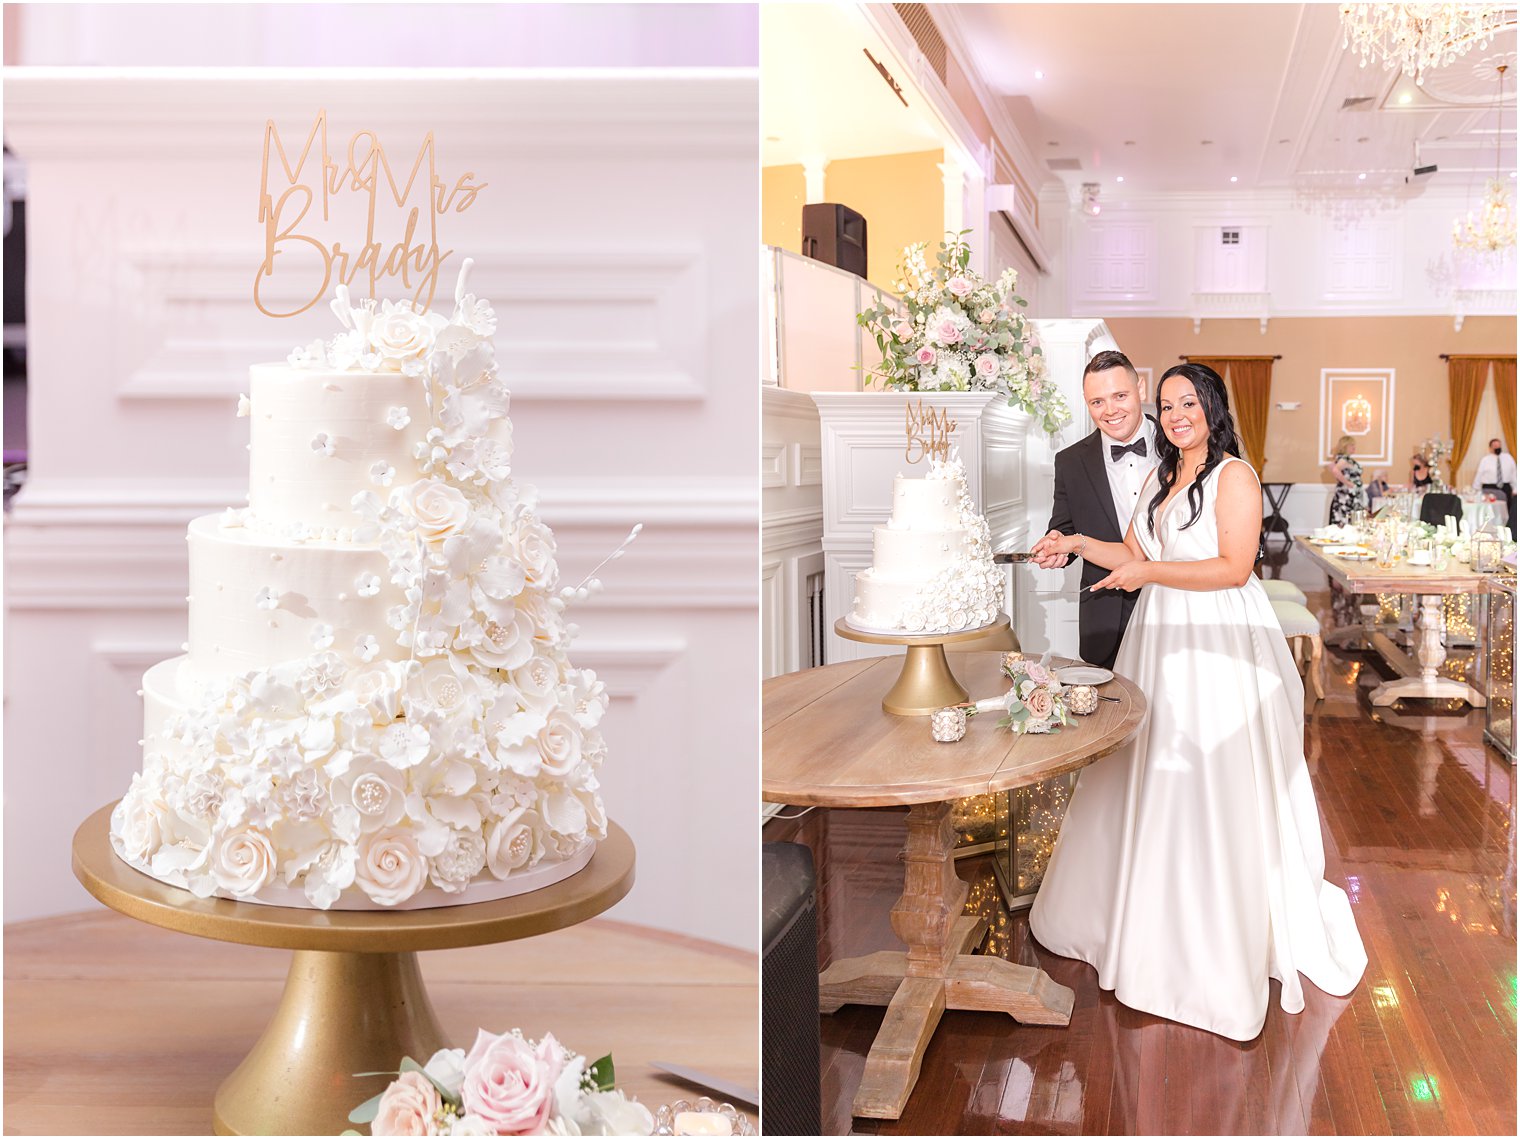 newlyweds cut tiered wedding cake on gold stand